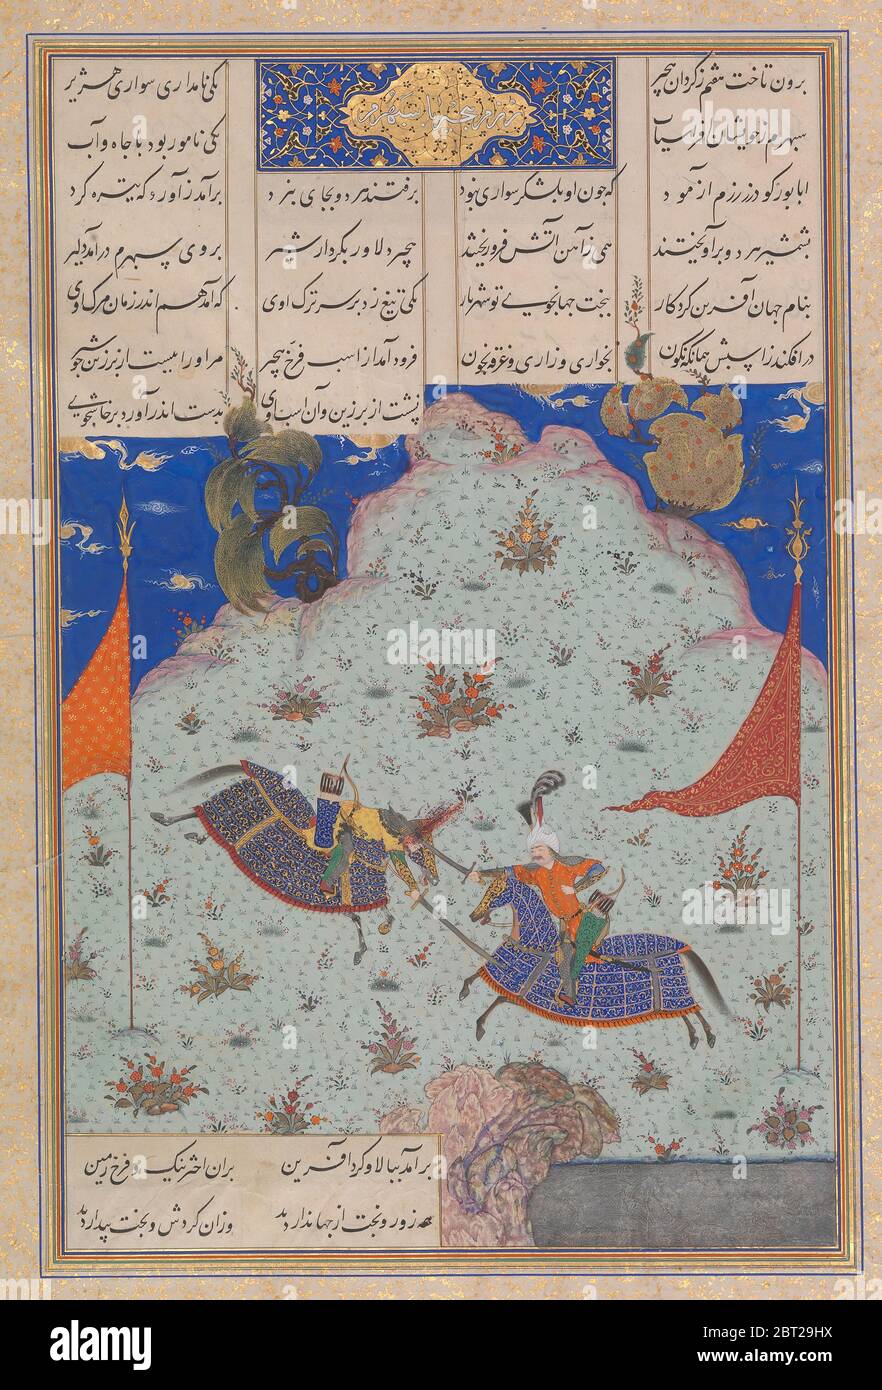 The Sixth Joust of the Rooks: Bizhan Versus Ruyyin, Folio 343r from the Shahnama (Book of Kings) of Shah Tahmasp, ca. 1525-30. Stock Photo